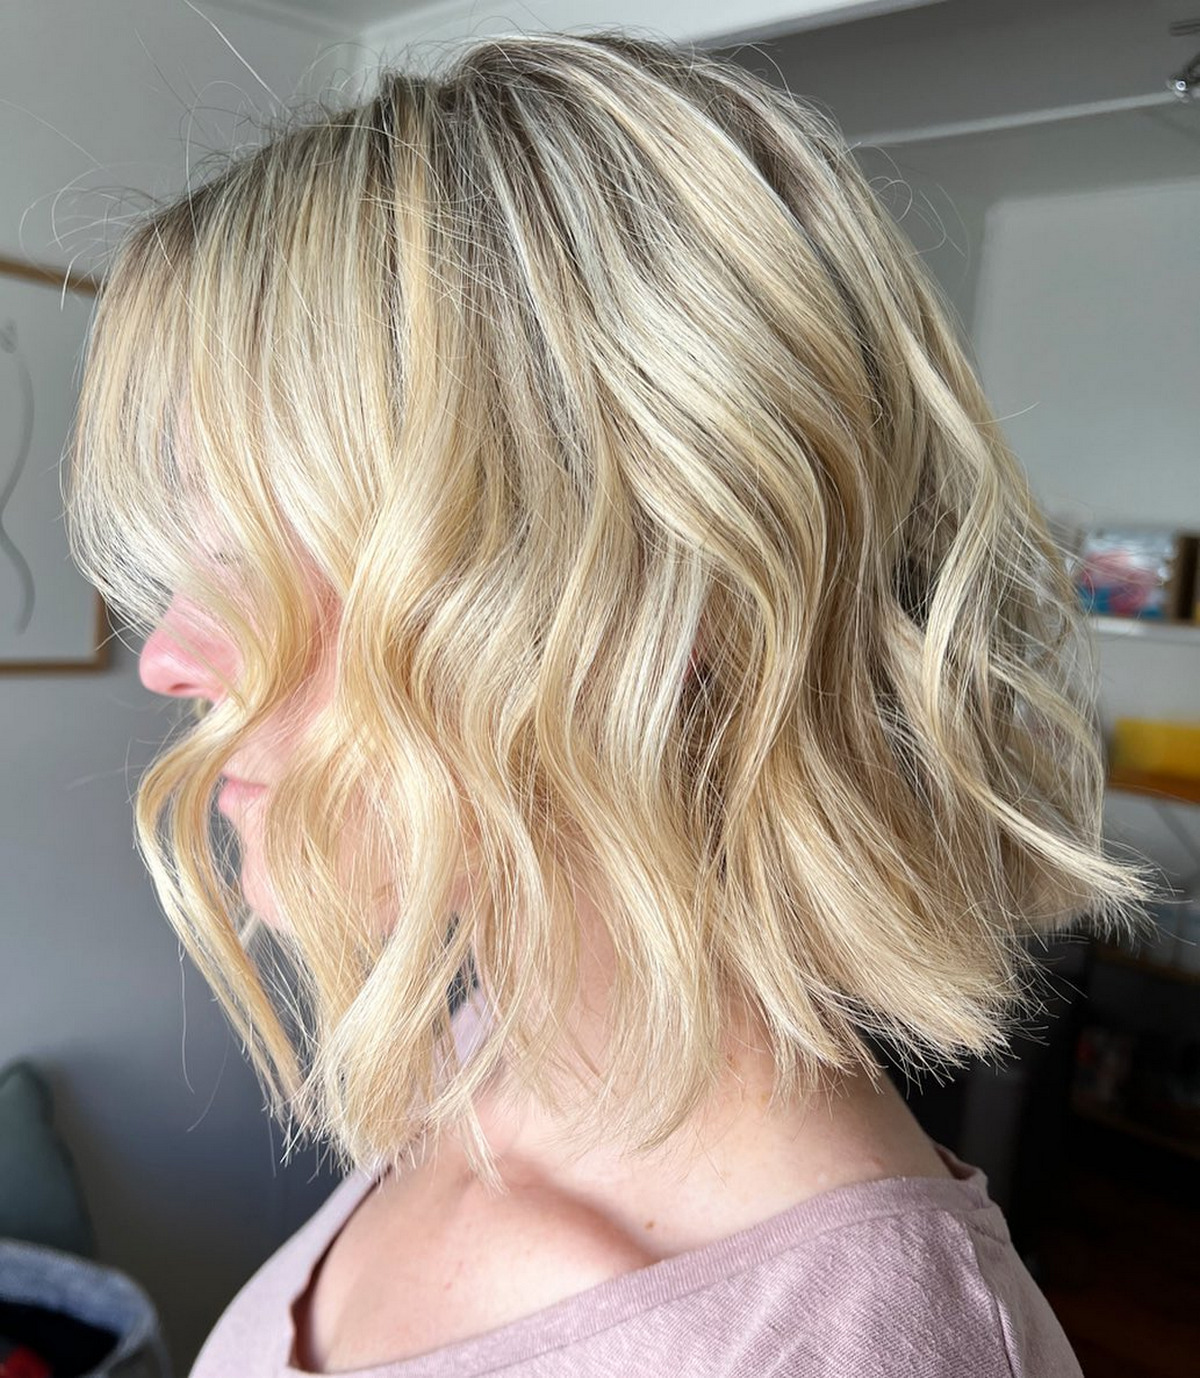 Textured Blonde Bob With Tousled Ends